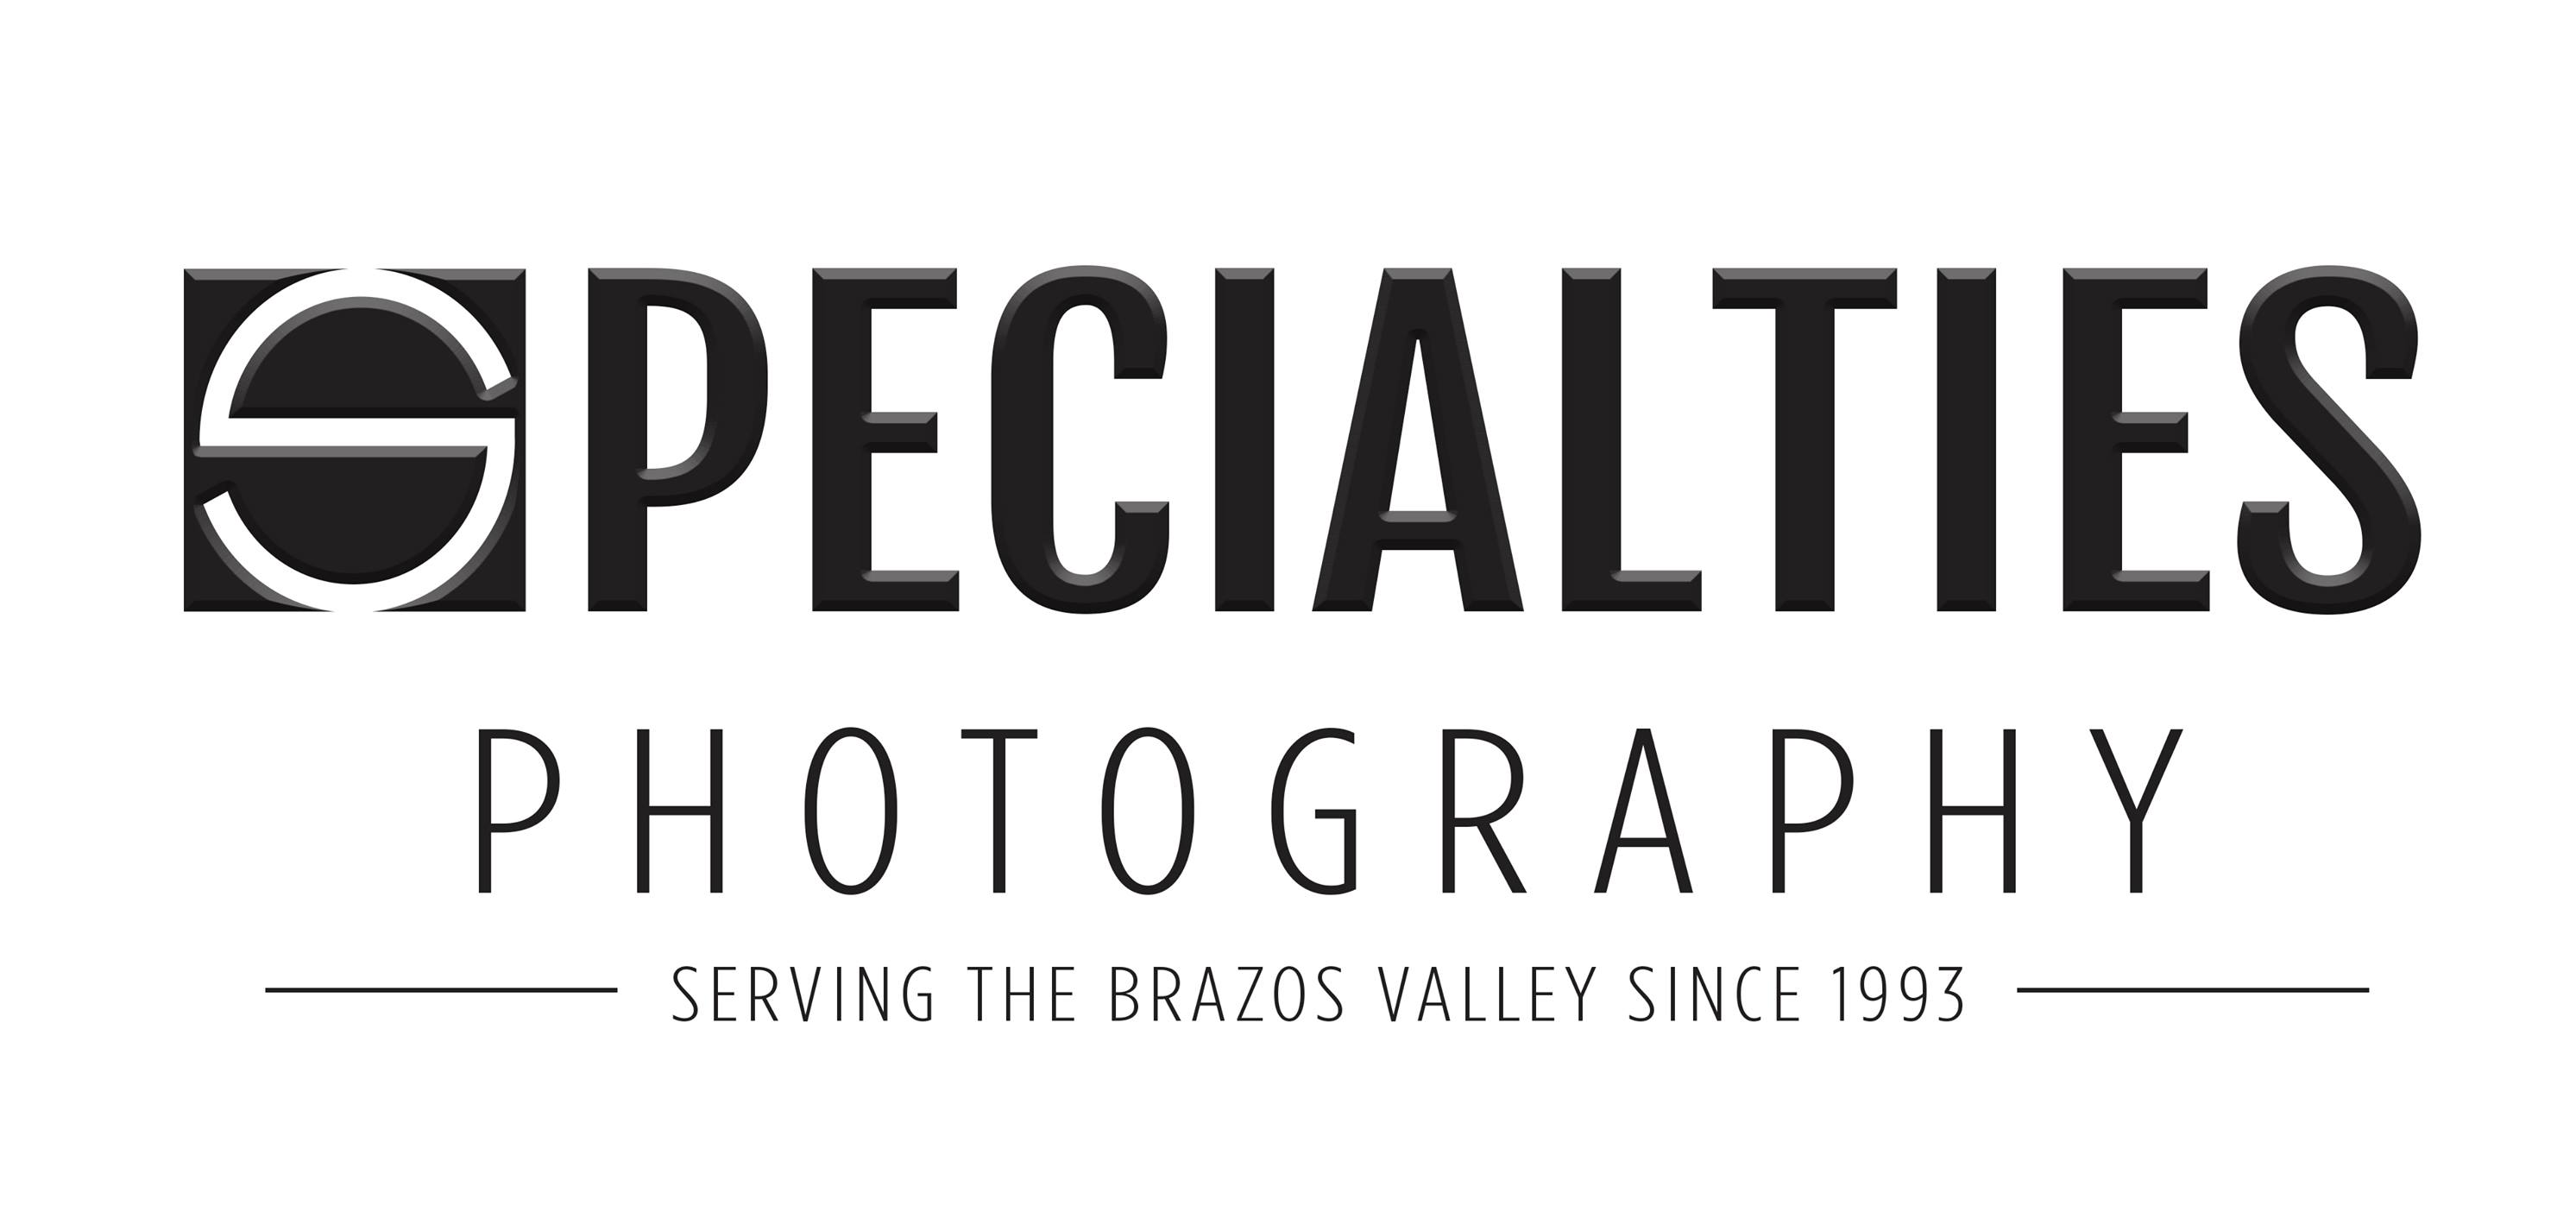 Specialty Photography